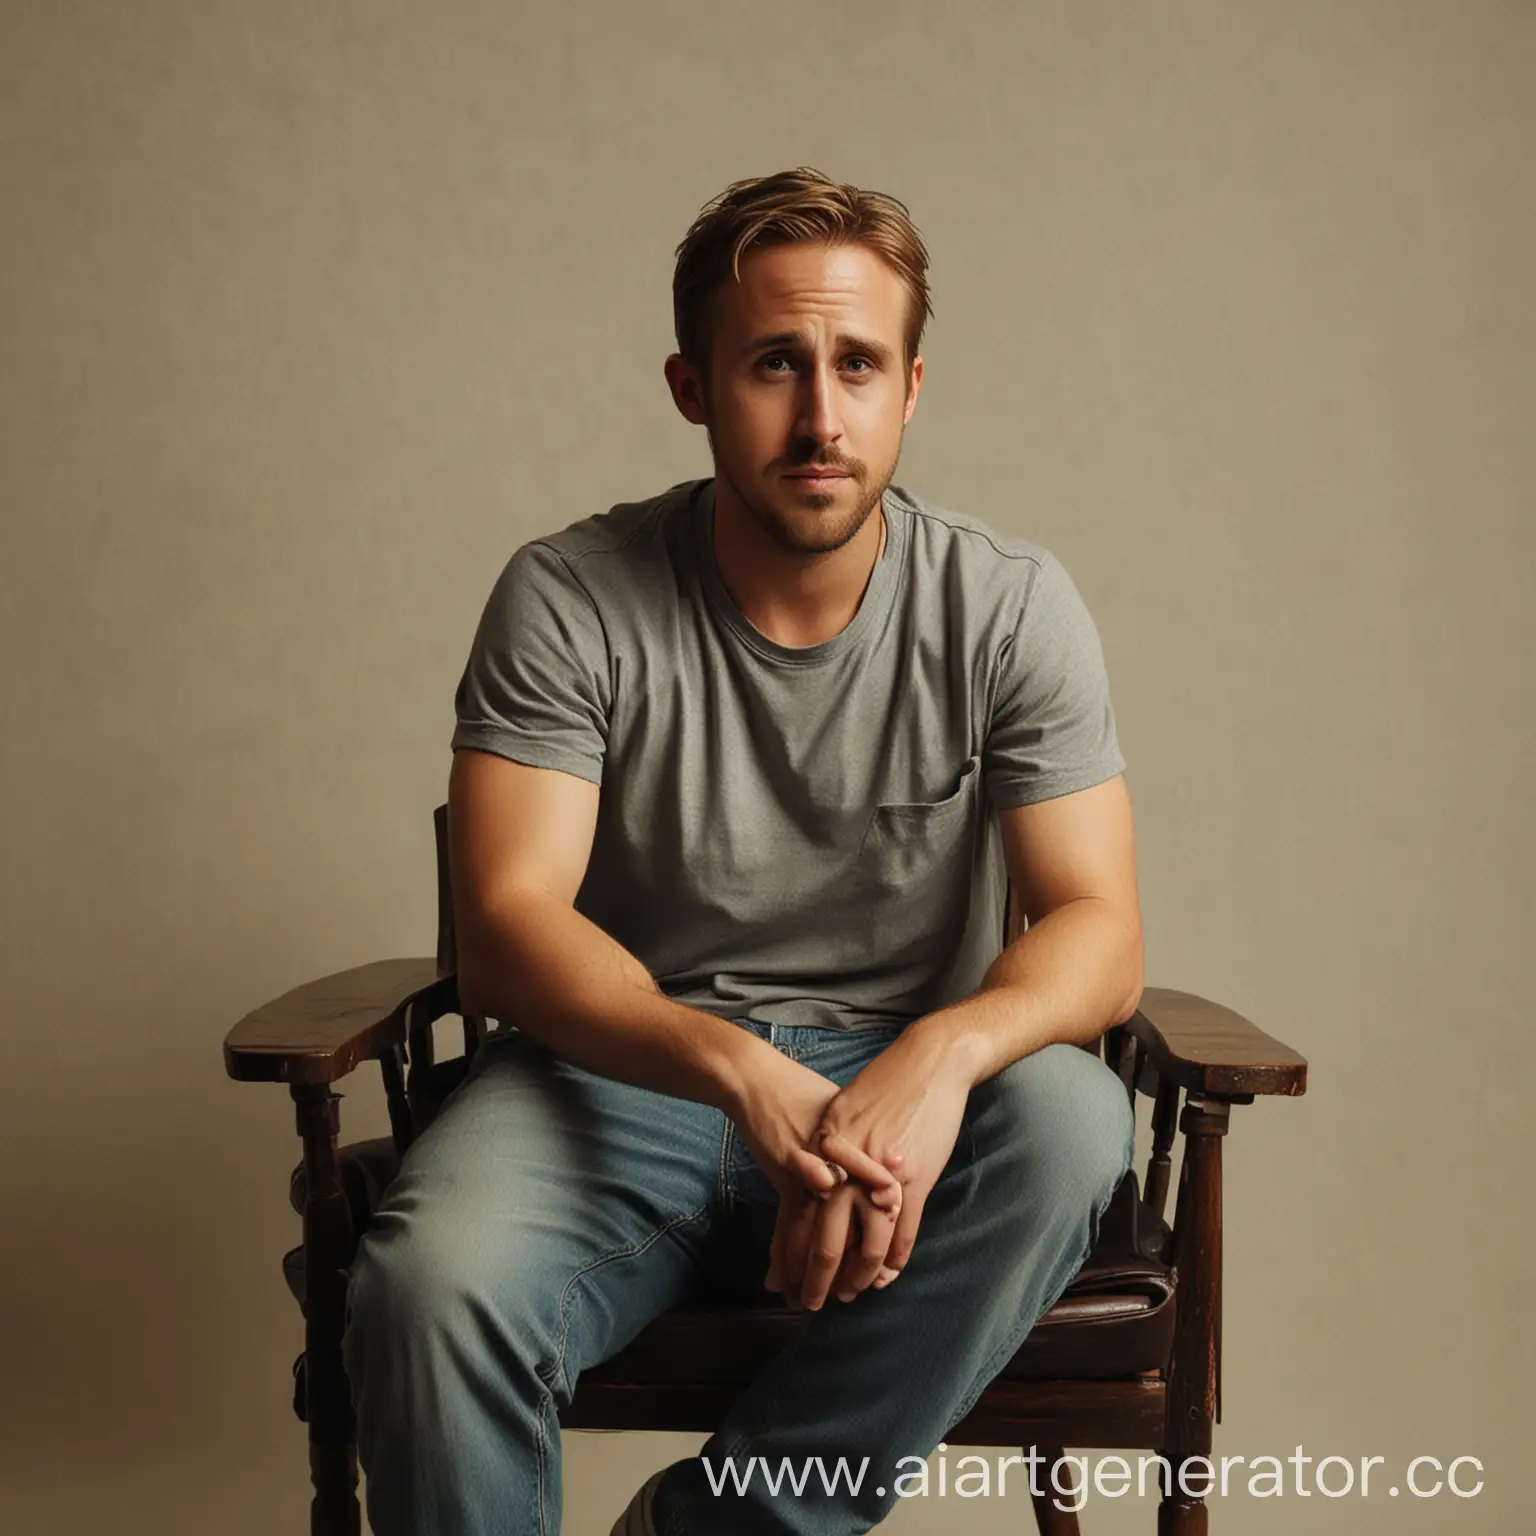 Pixelated-Ryan-Gosling-Sitting-on-a-Chair